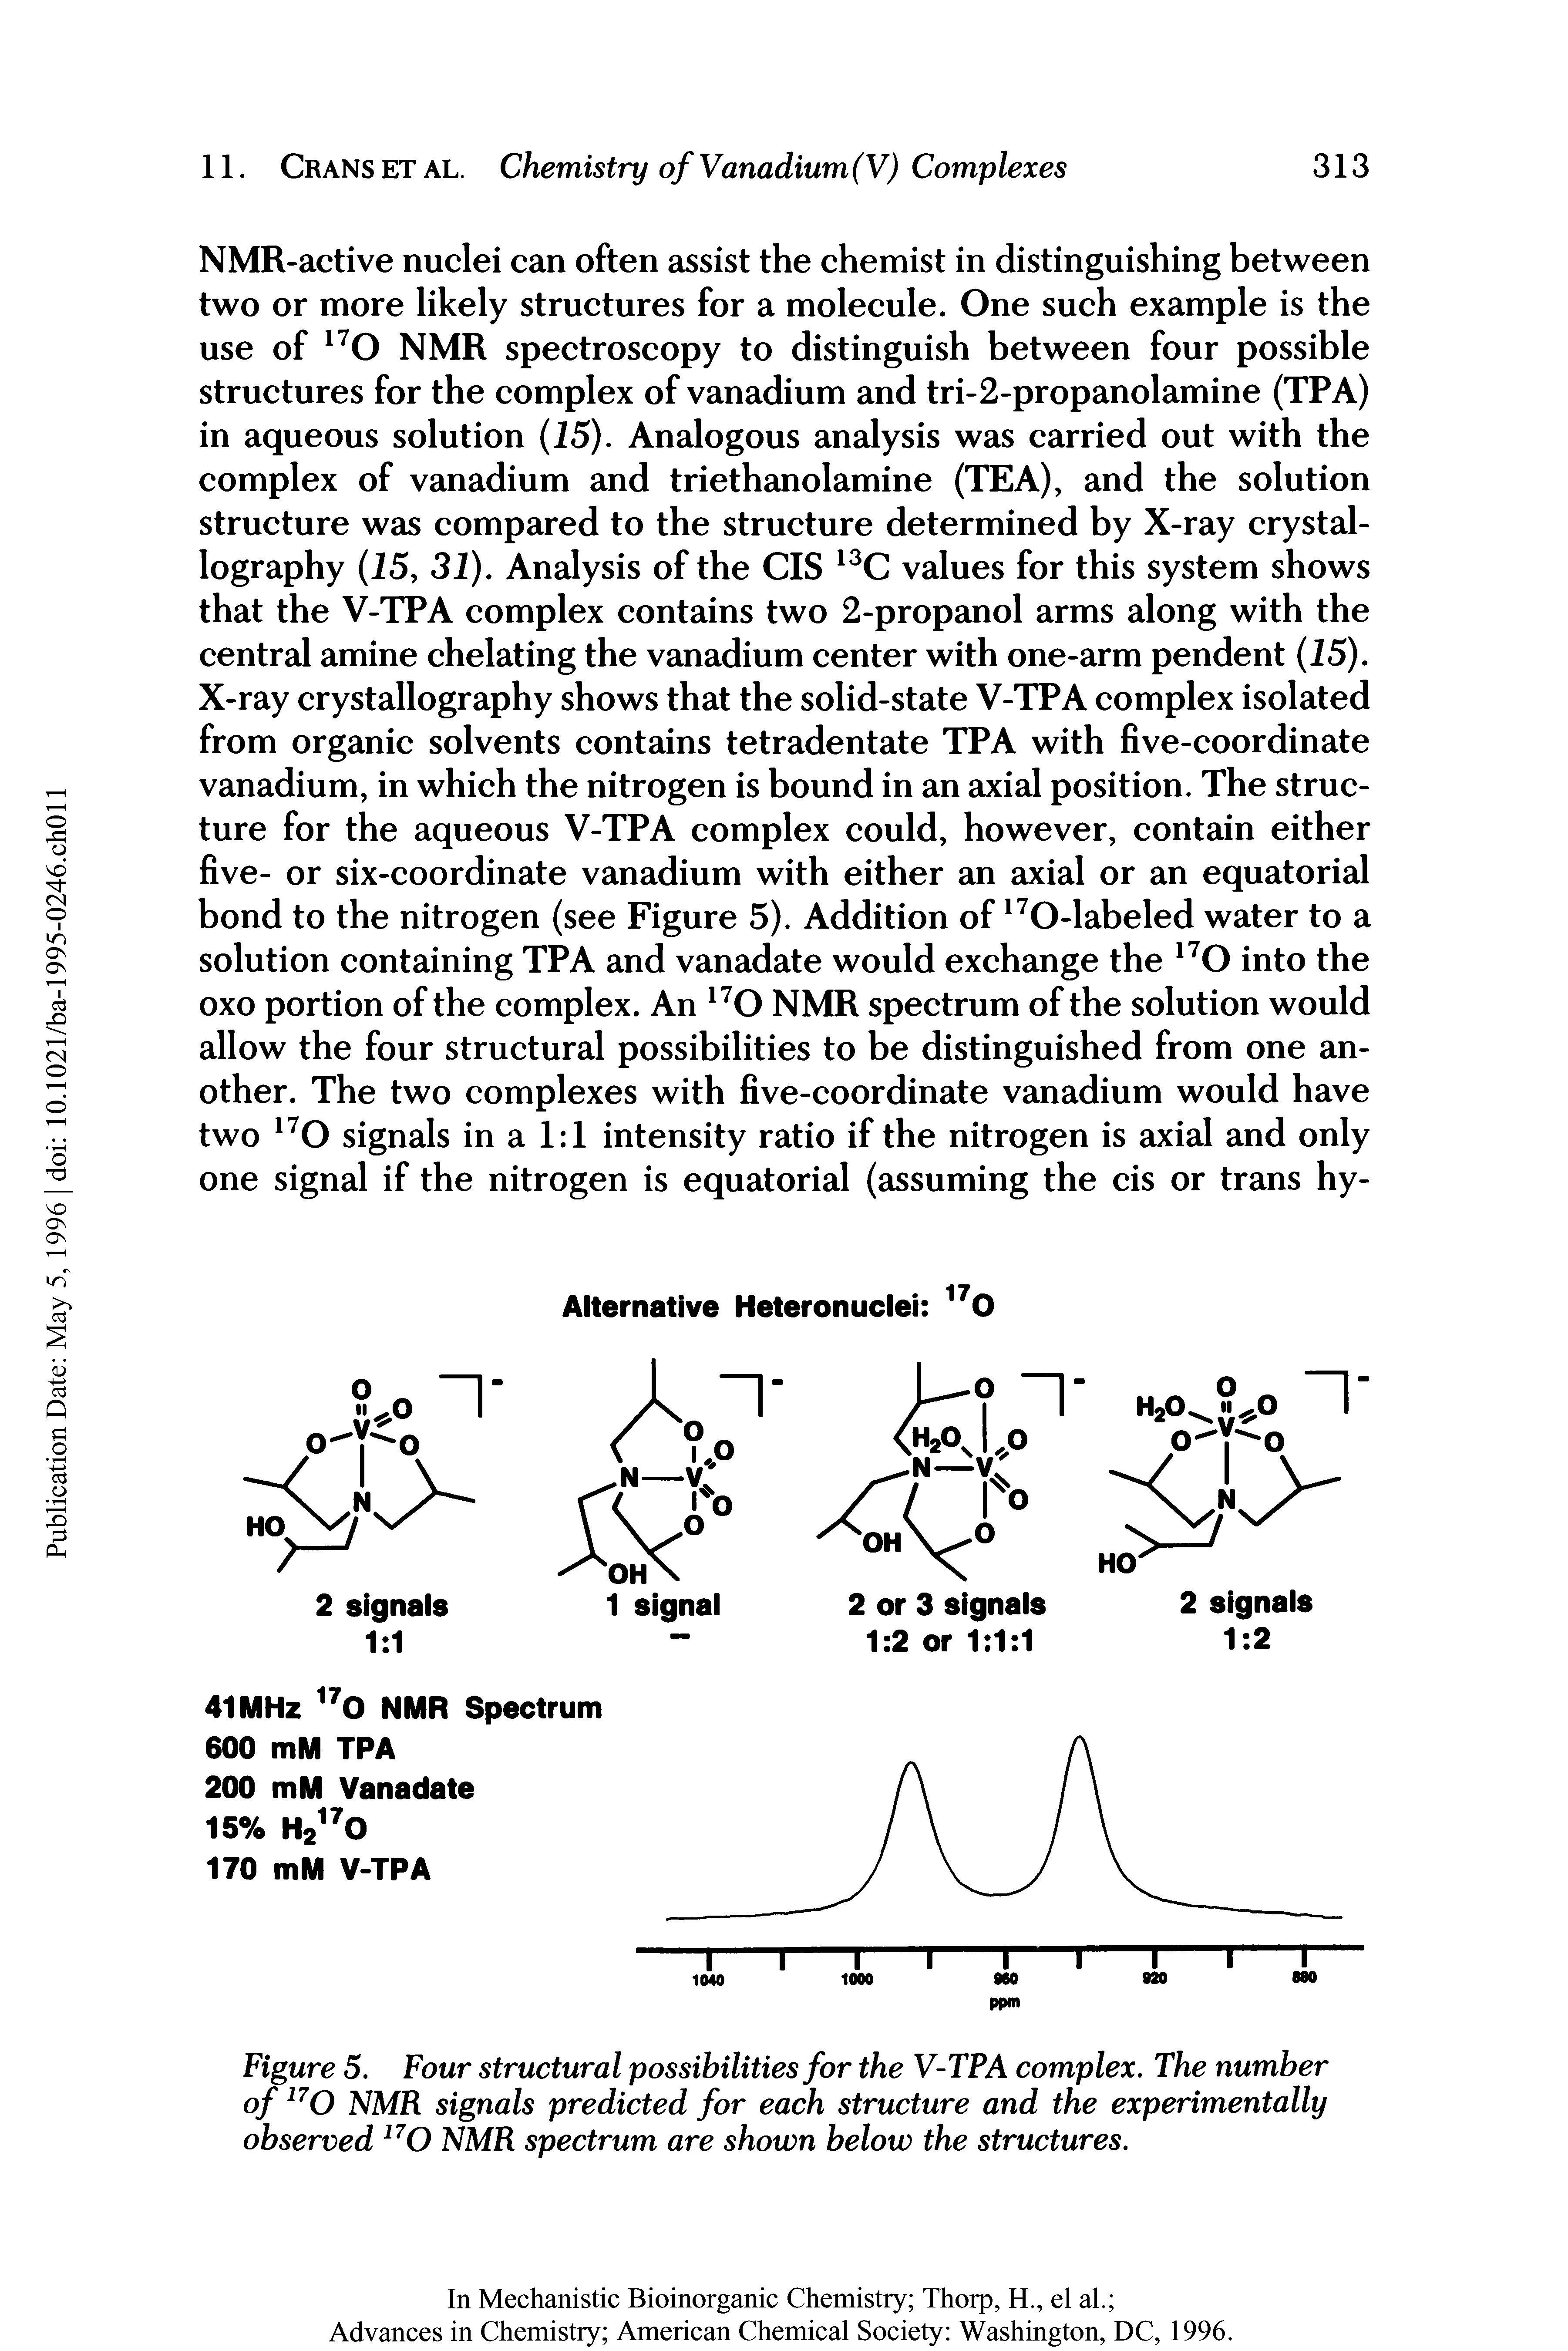 Figure 5. Four structural possibilities for the V-TPA complex. The number of17O NMR signals predicted for each structure and the experimentally observed 17O NMR spectrum are shown below the structures.